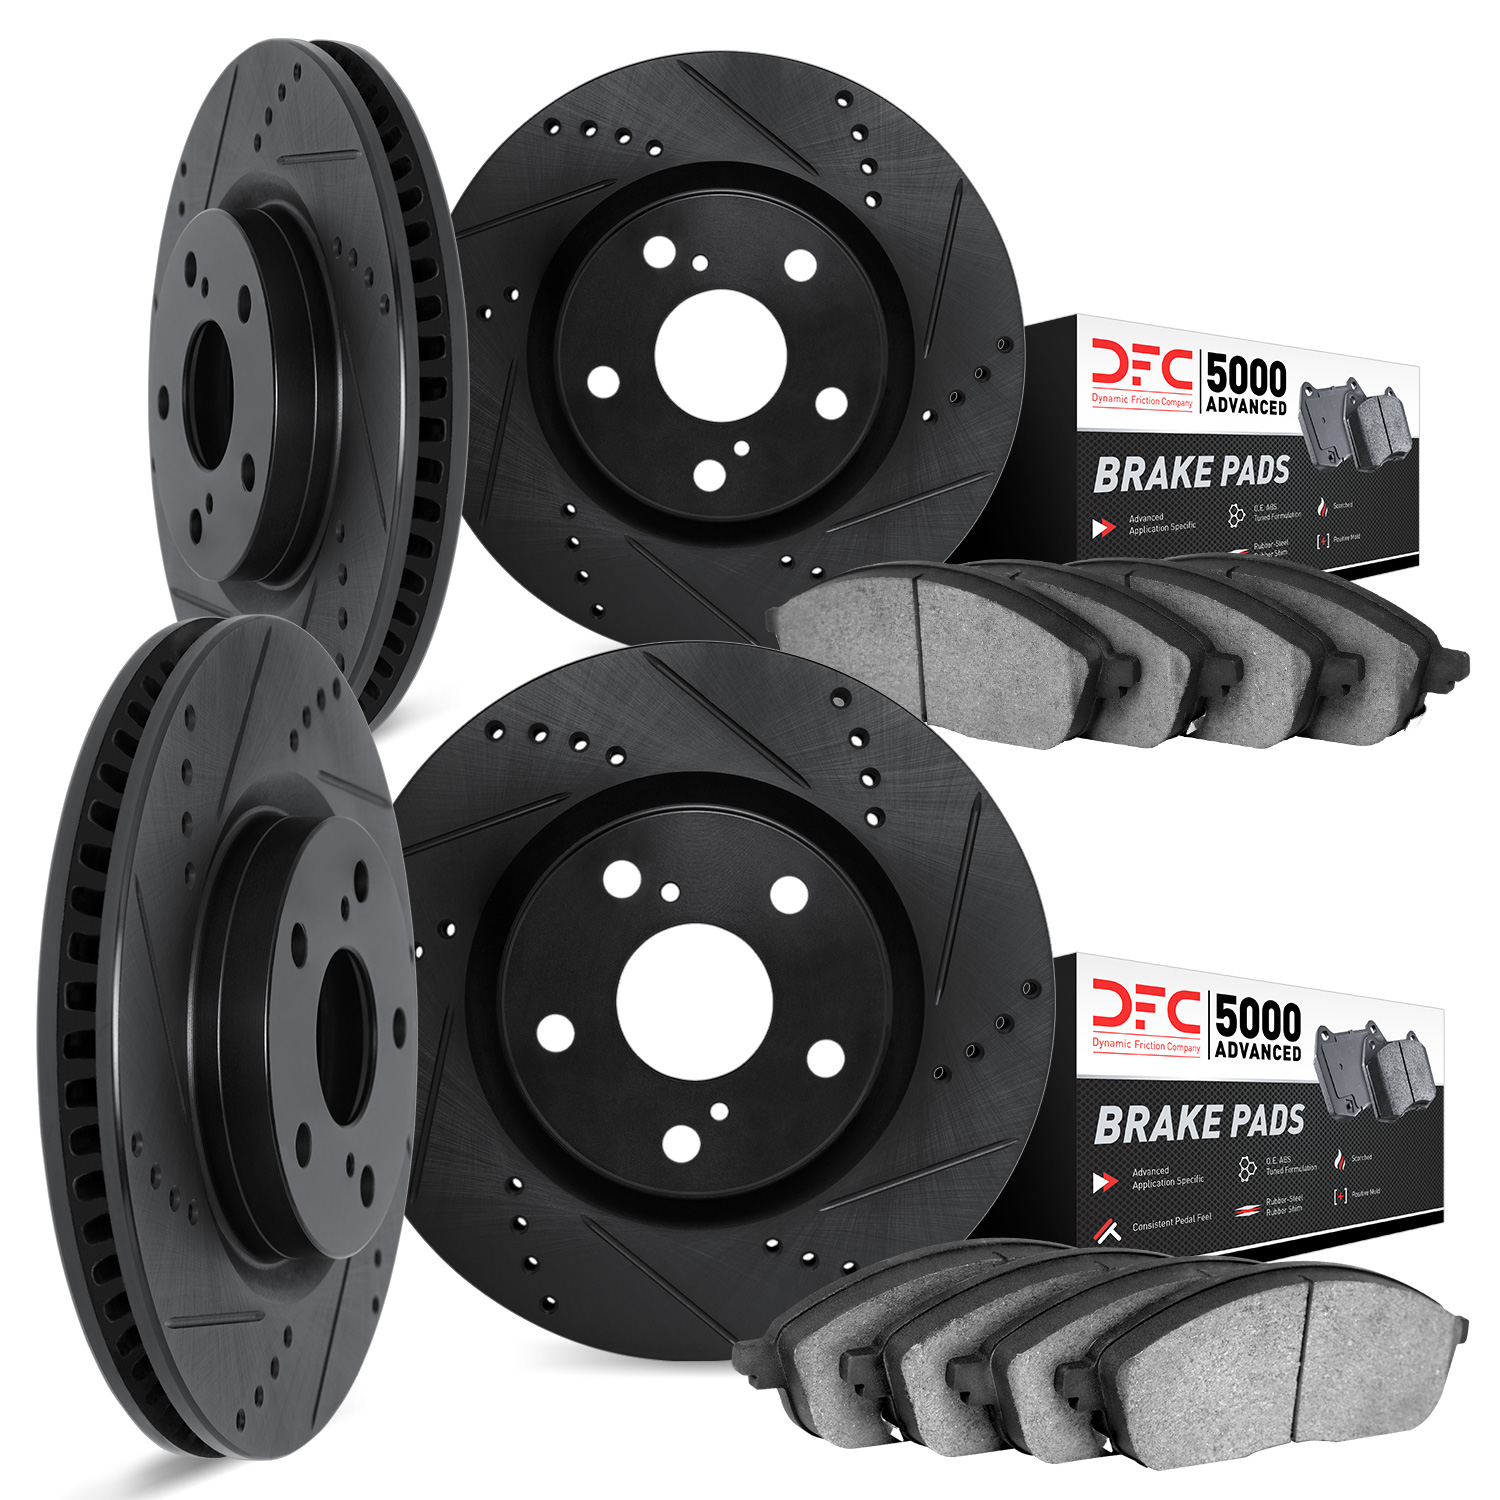 8504-31045 Drilled/Slotted Brake Rotors w/5000 Advanced Brake Pads Kit [Black], 2015-2015 BMW, Position: Front and Rear